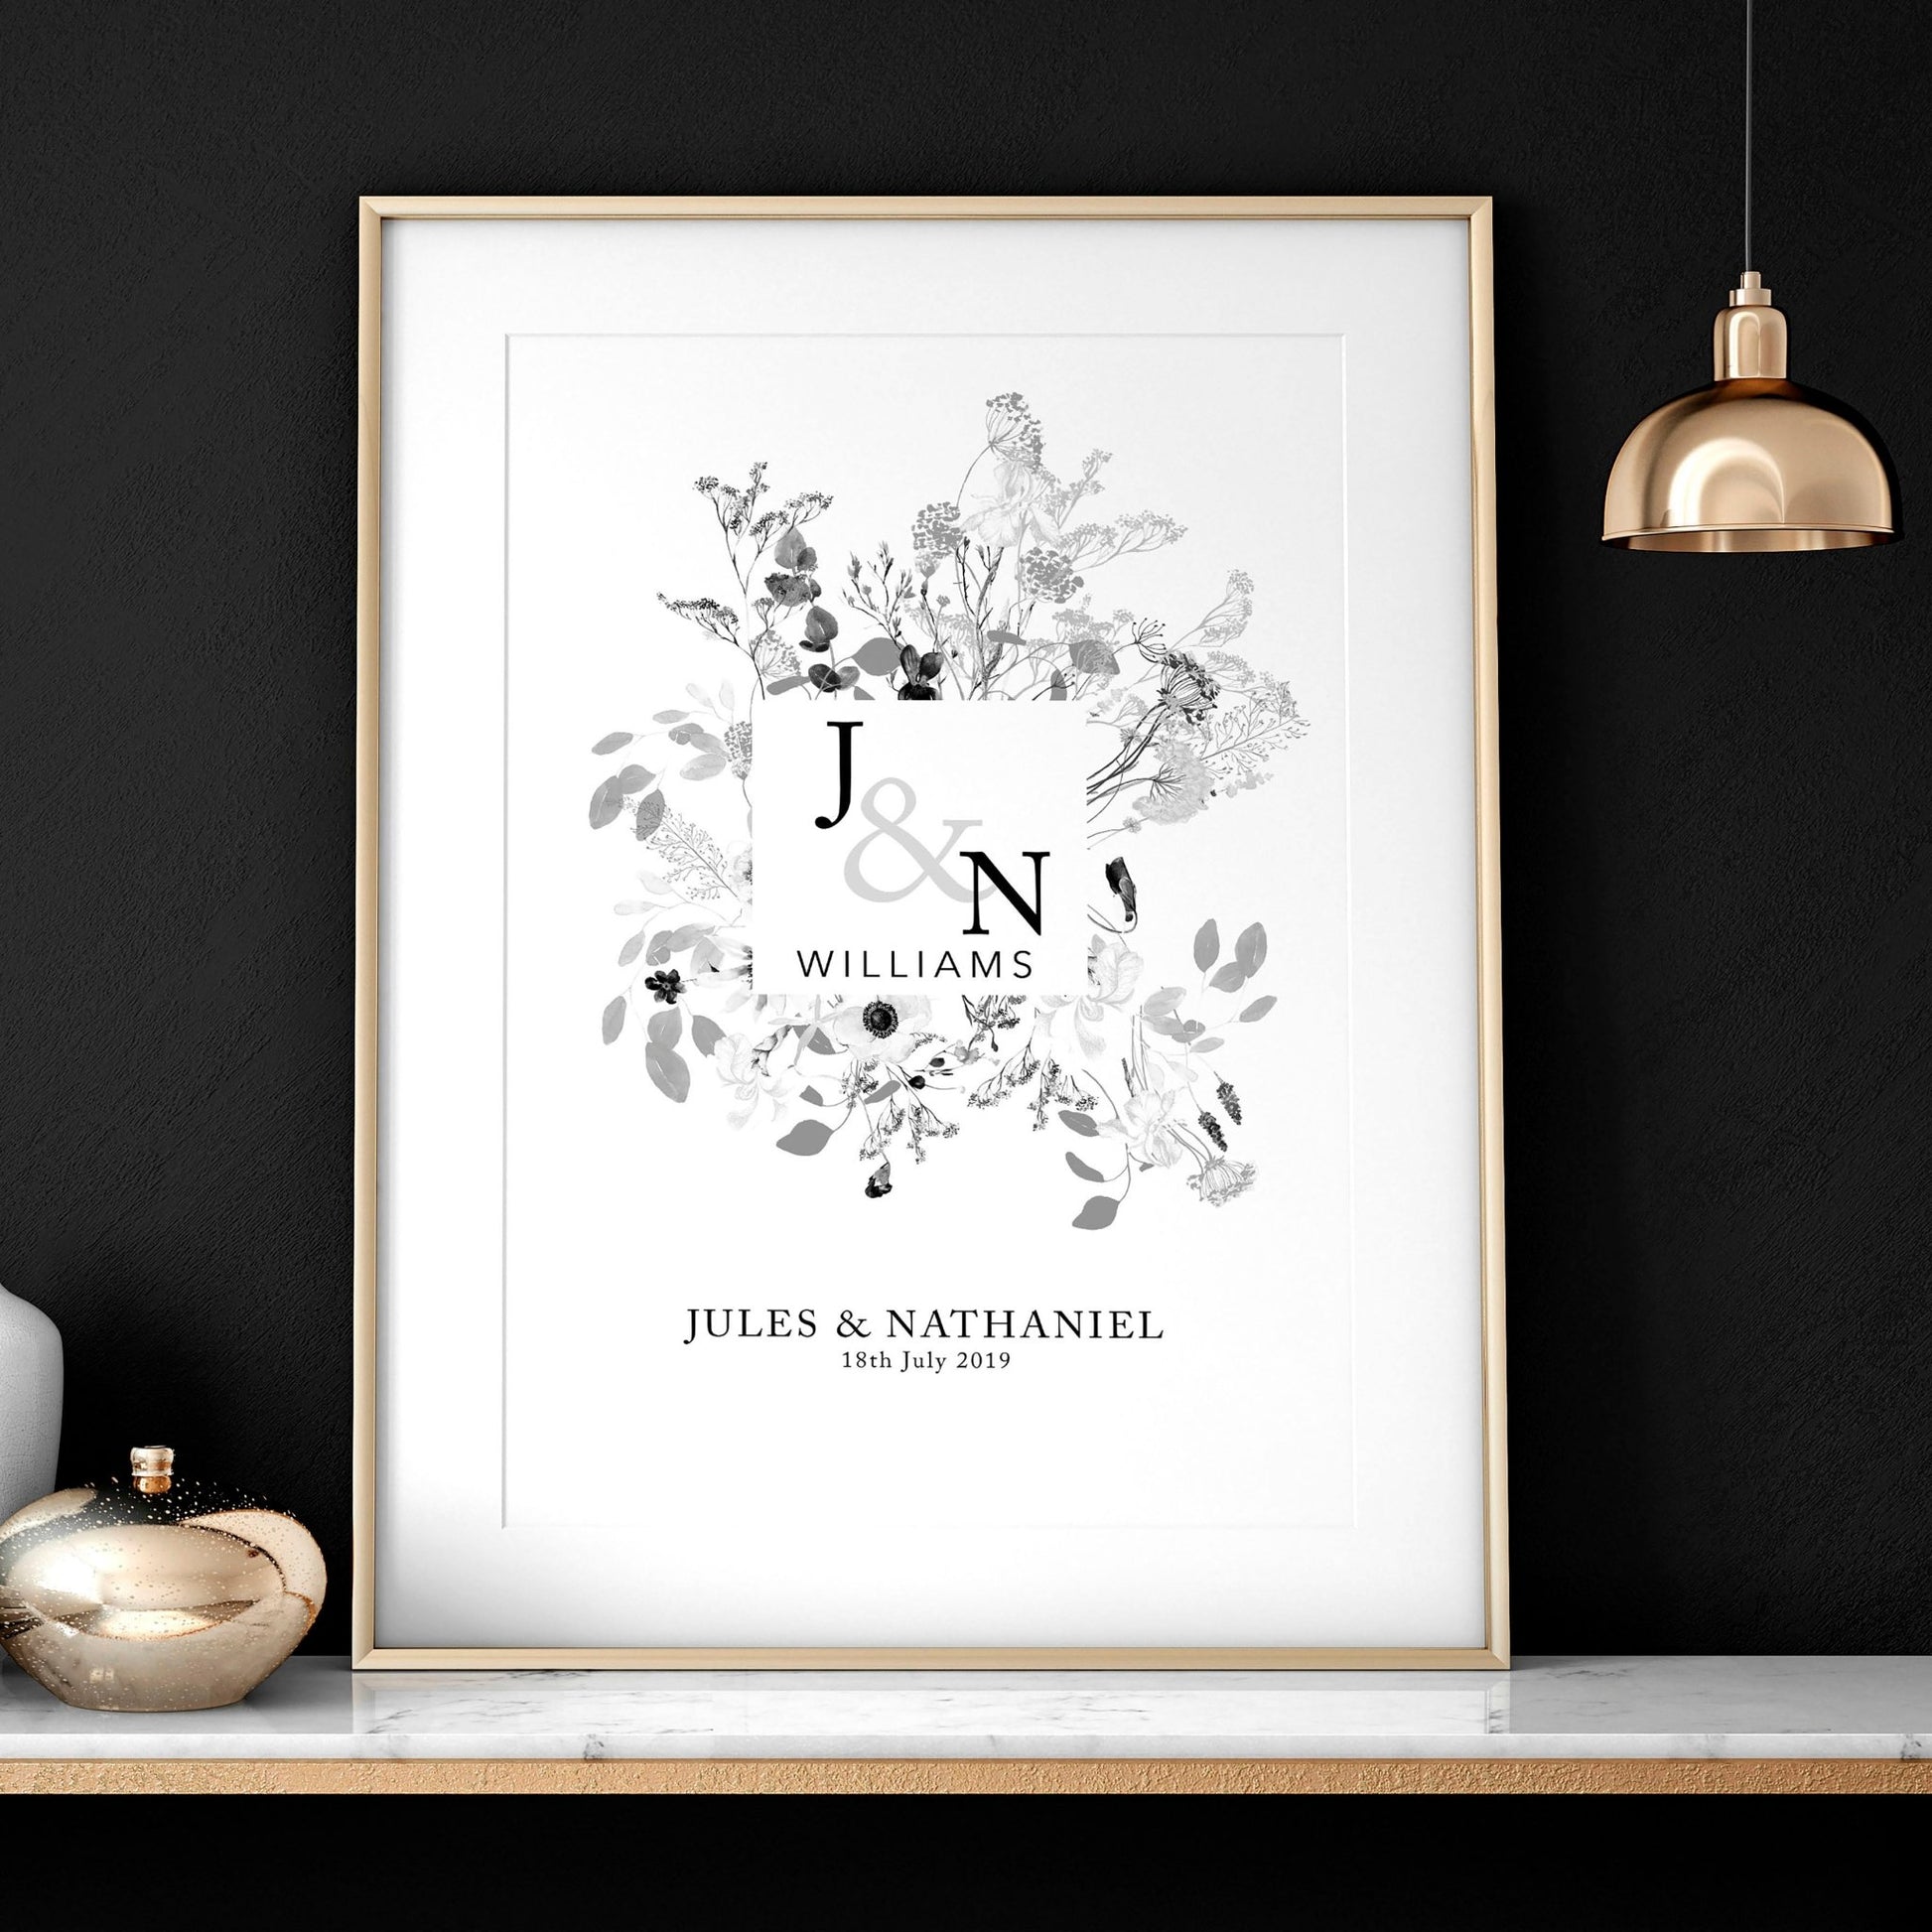 Personalised wedding anniversary gifts | wall art print - About Wall Art